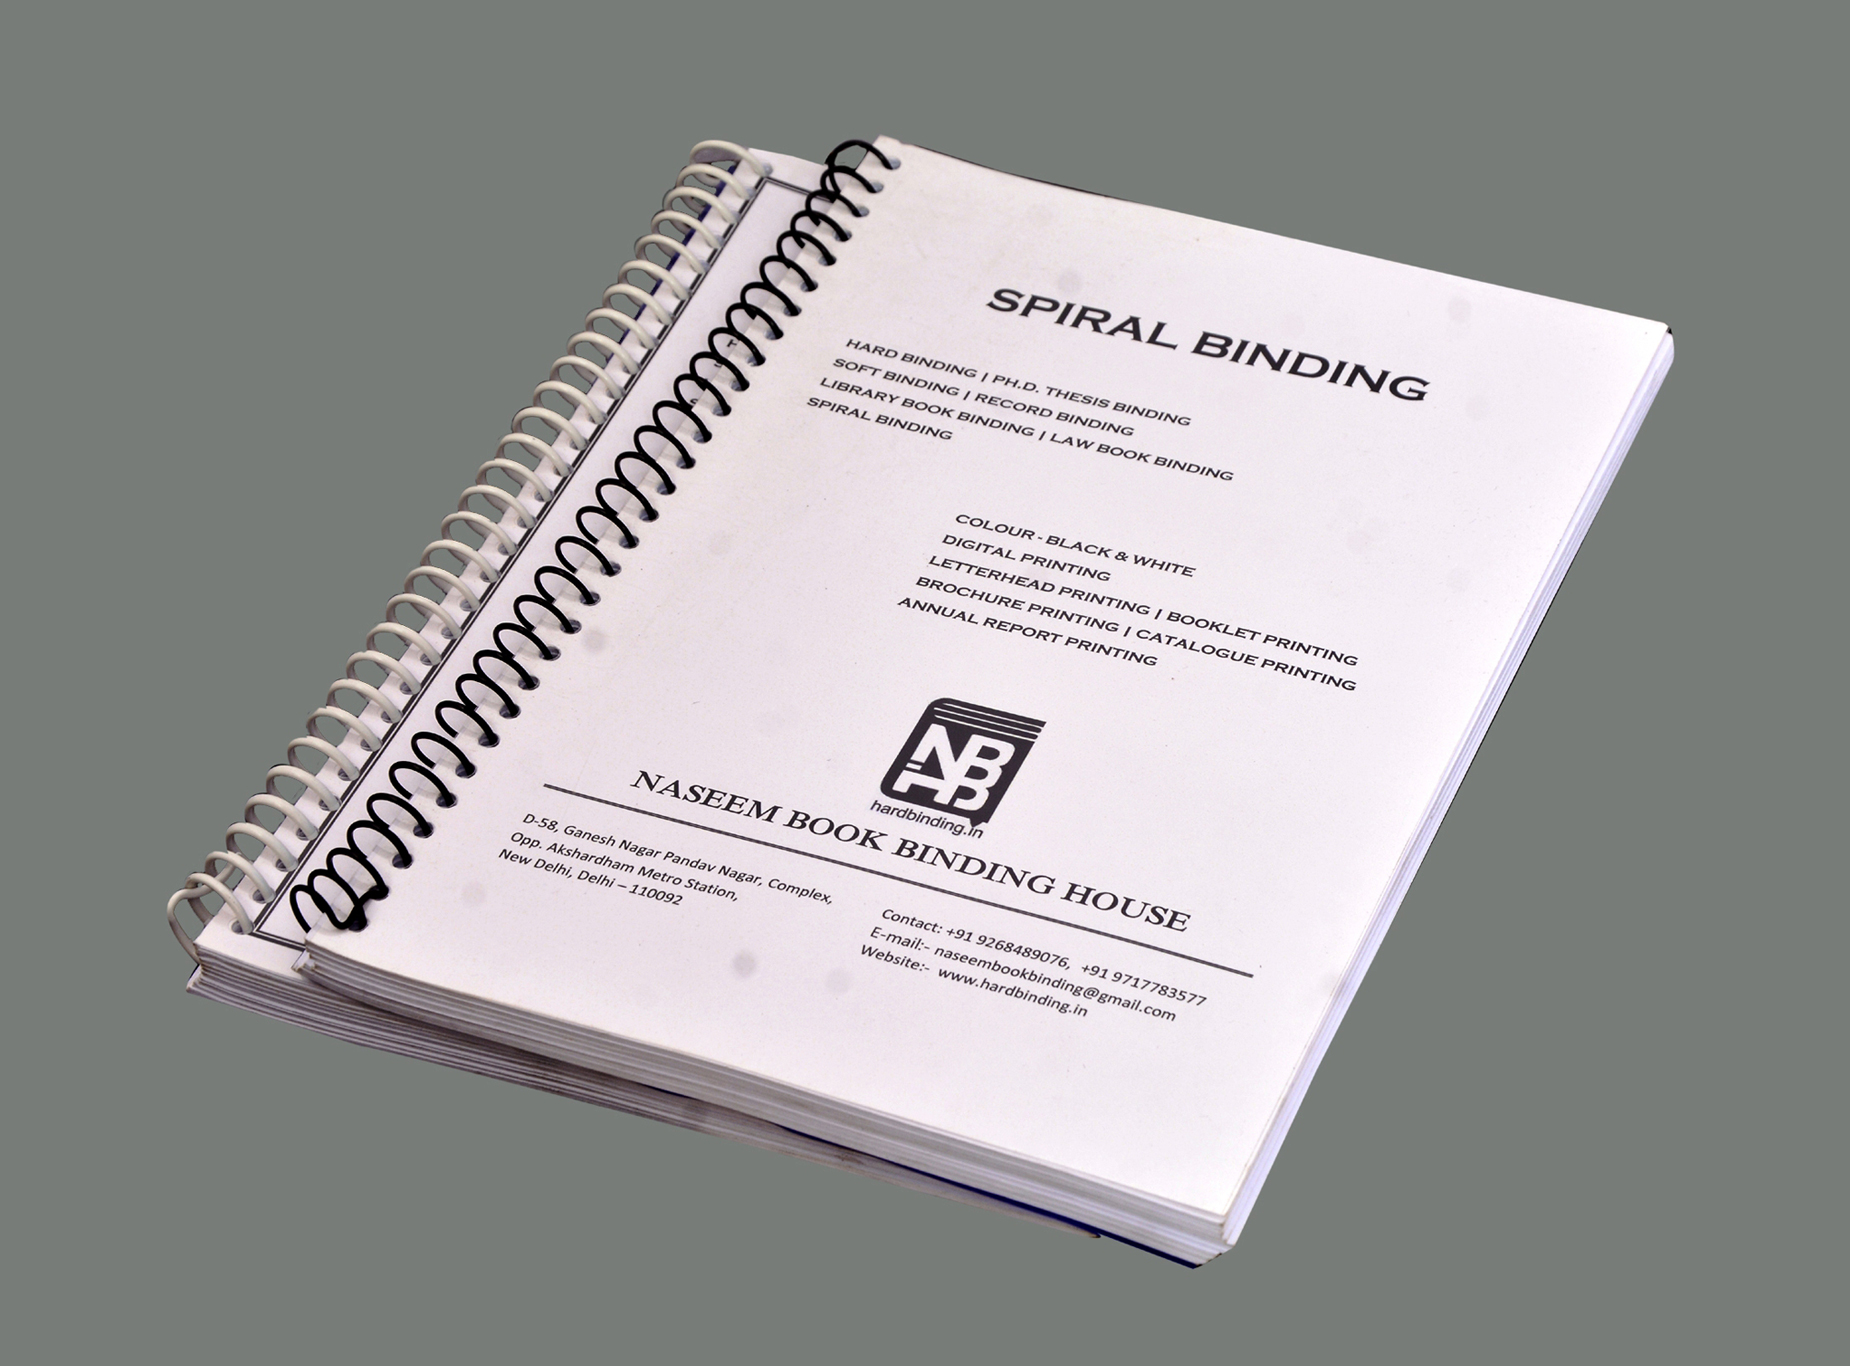 Thesis-Dissertation Print-Bind | Bookbinding & Printing Services